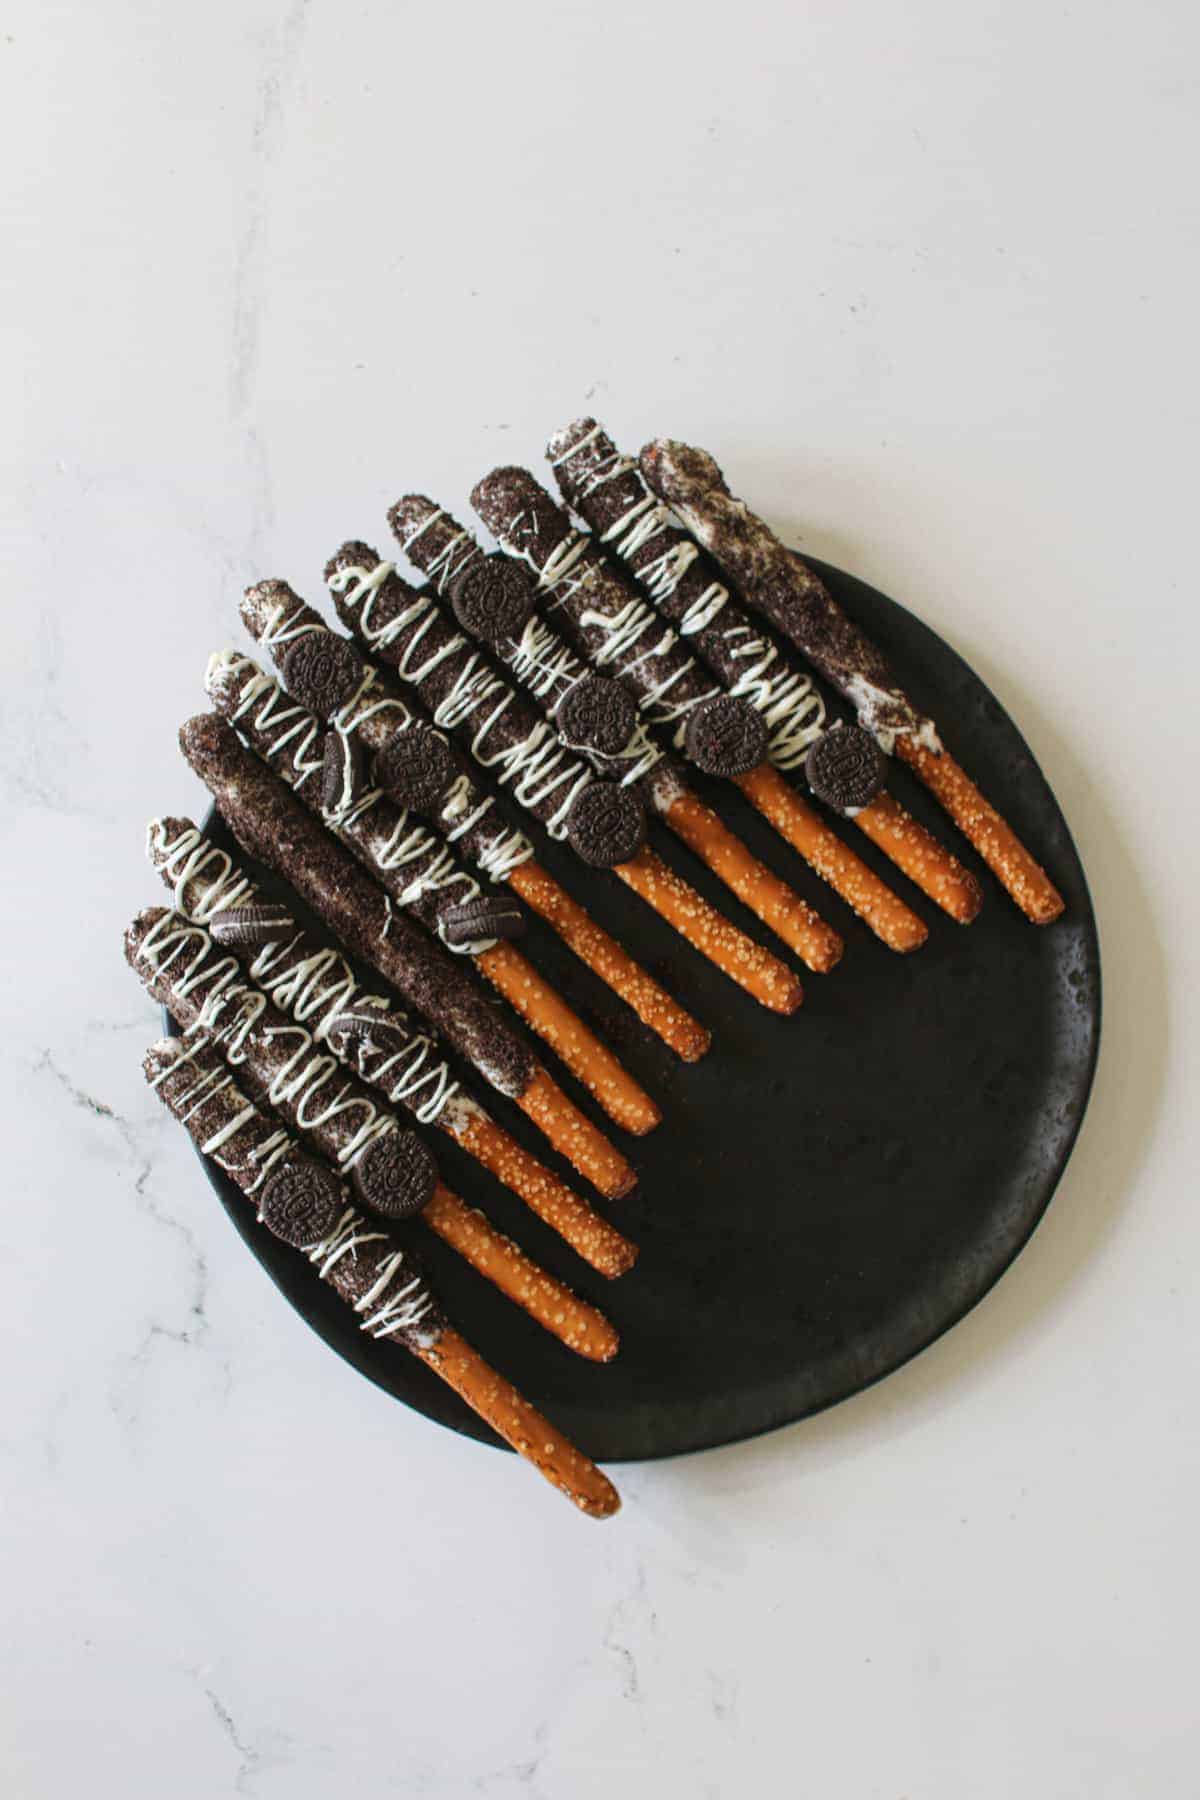 11 Cookies and Cream Pretzels on a place plate slightly angled on a white marble background.